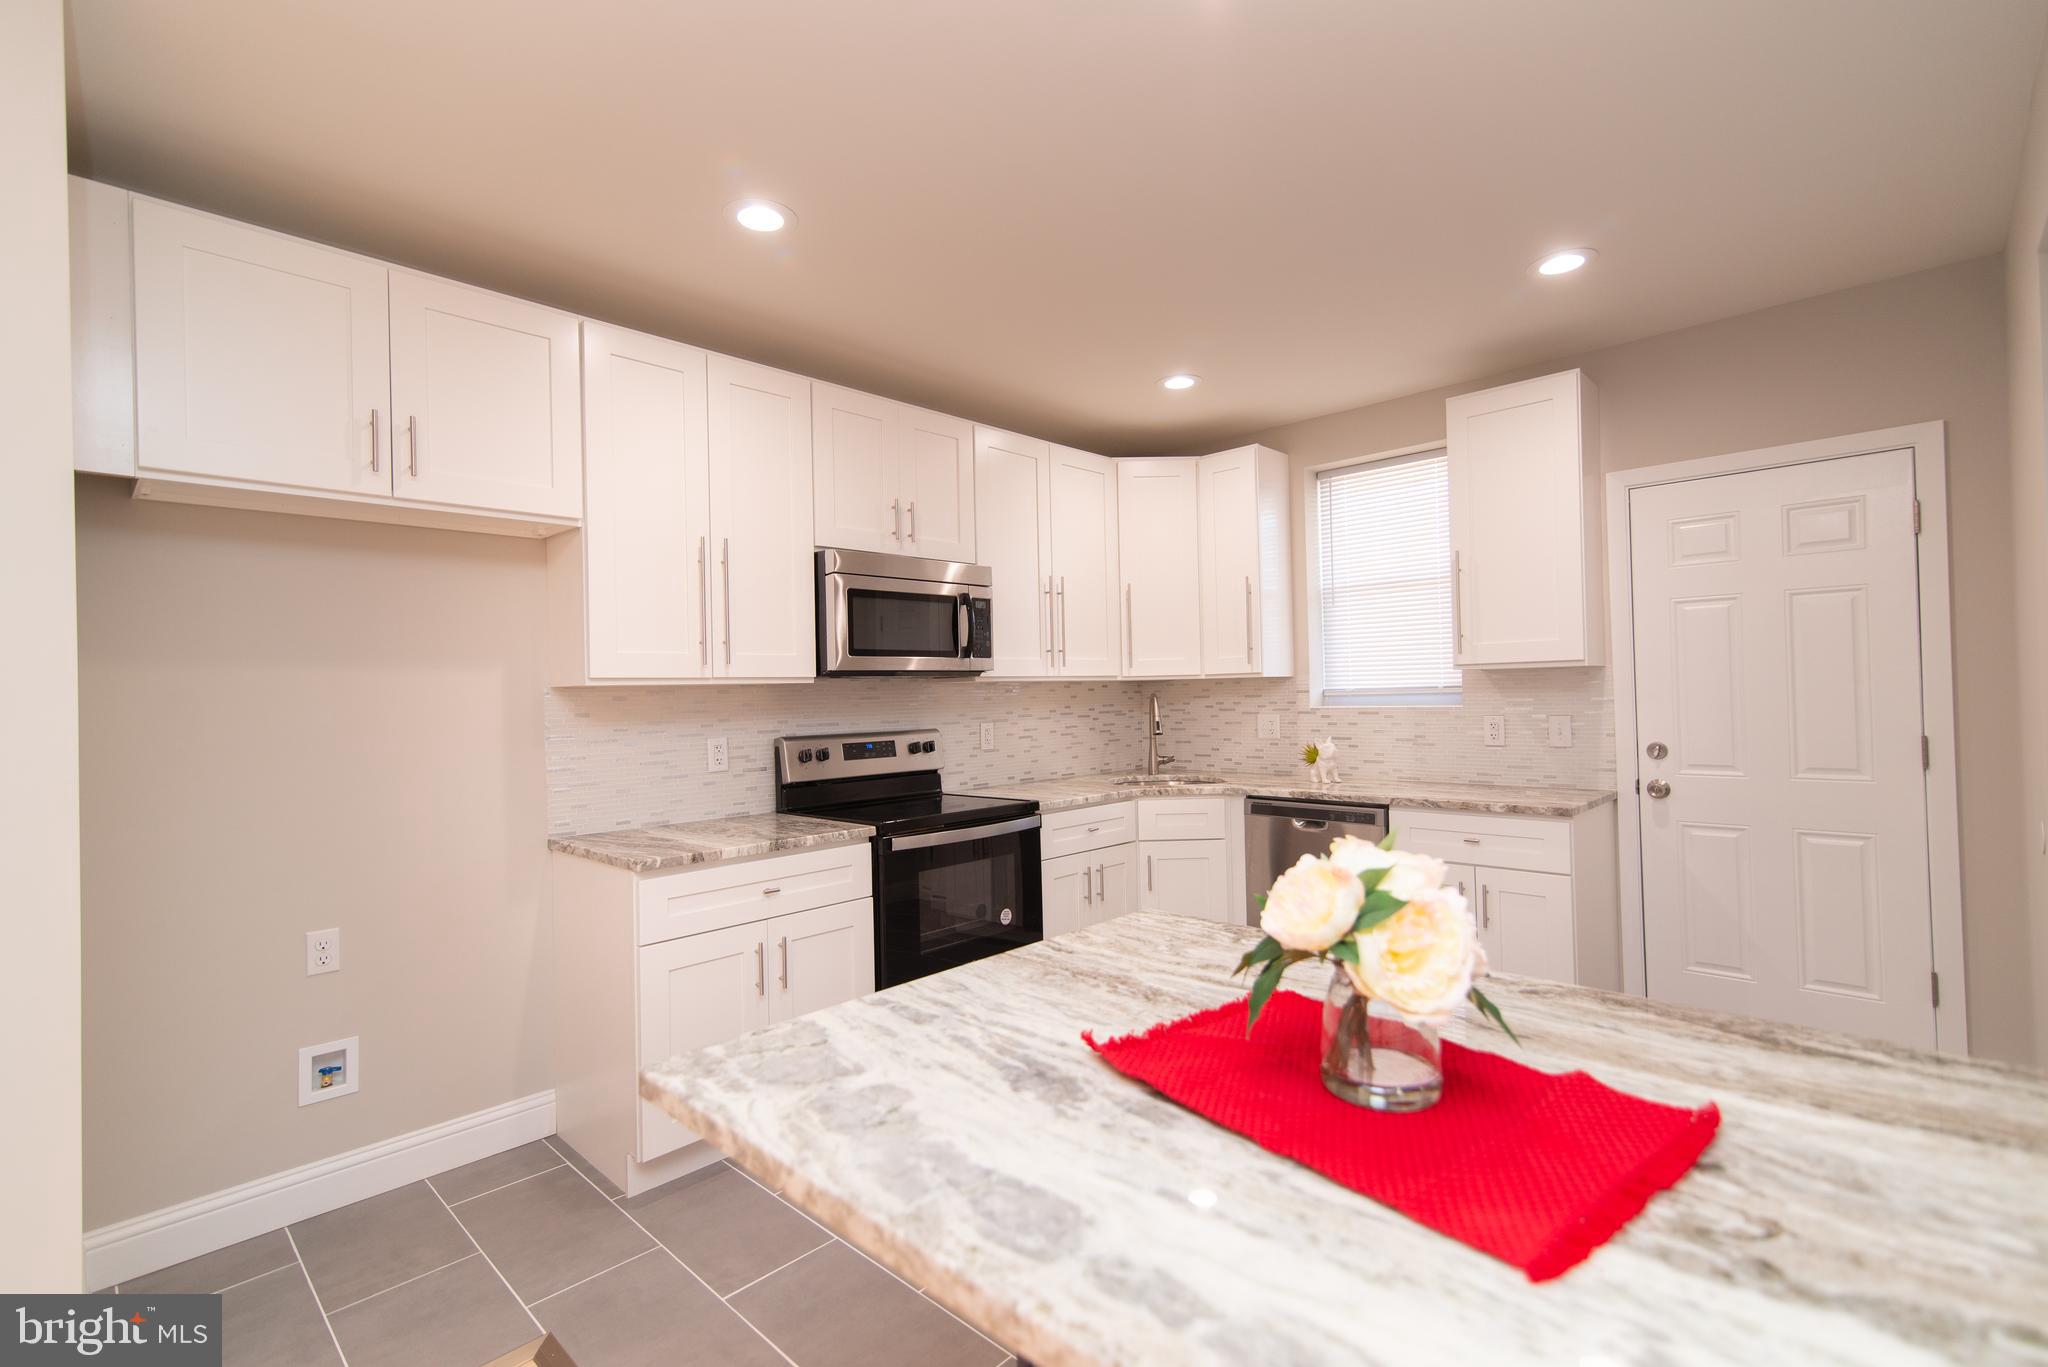 a kitchen with stainless steel appliances granite countertop a sink dishwasher stove top oven and cabinets